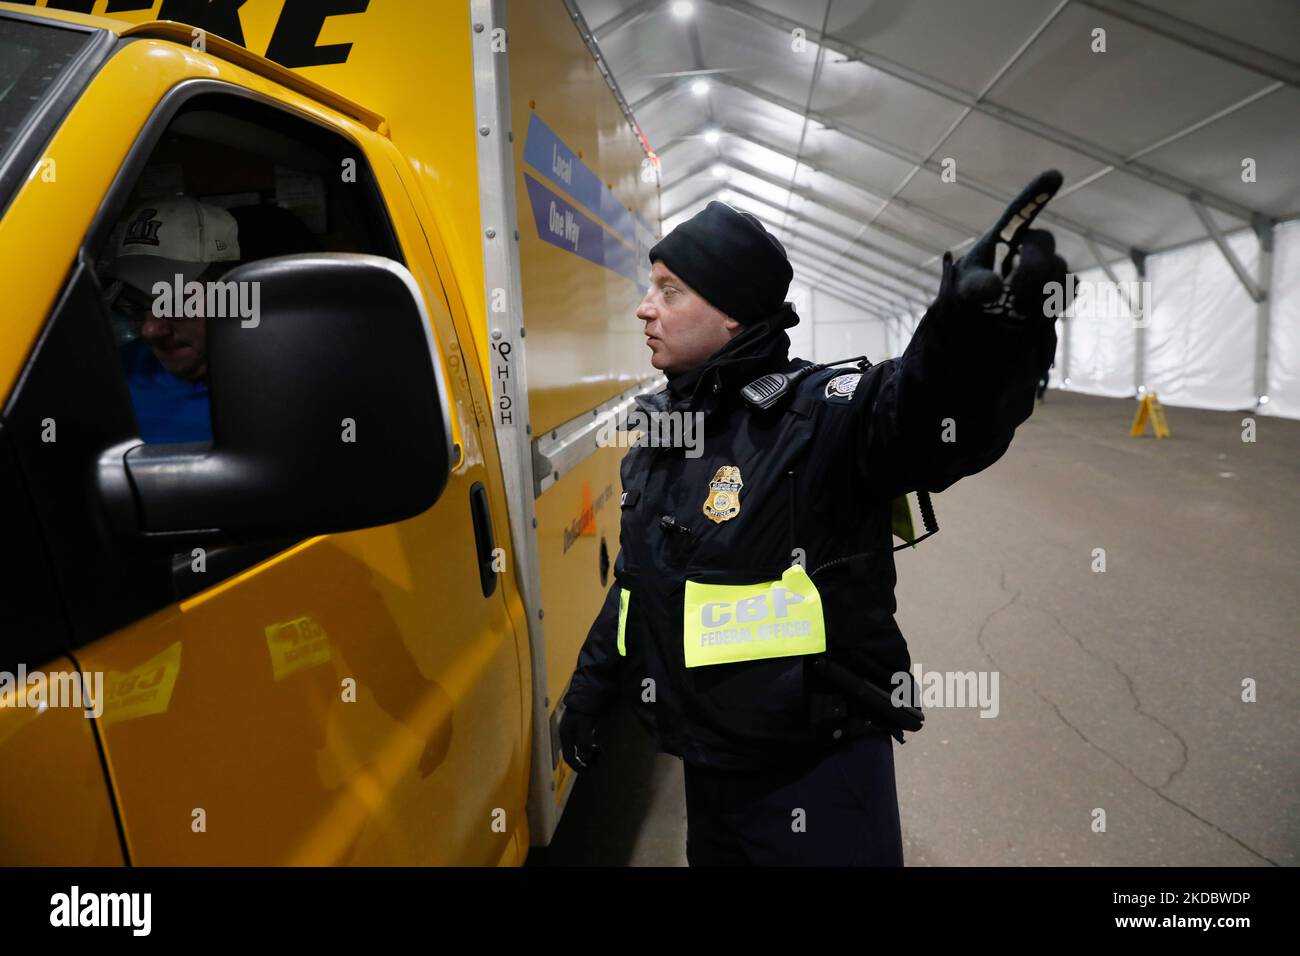 A U.S. Customs and Border Protection, Office of Field Operations, officer gestures as he directs the driver of a truck where to stand shortly before X-raying the vehicle during non-intrusive inspections prior to Super Bowl LII in Minneapolis, Minn., Jan. 30, 2018. On Sunday, Feb. 4, the Philadelphia Eagles will face off against the New England Patriots for the NFL championship title. U.S. Customs and Border Protection photo by Glenn Fawcett Stock Photo